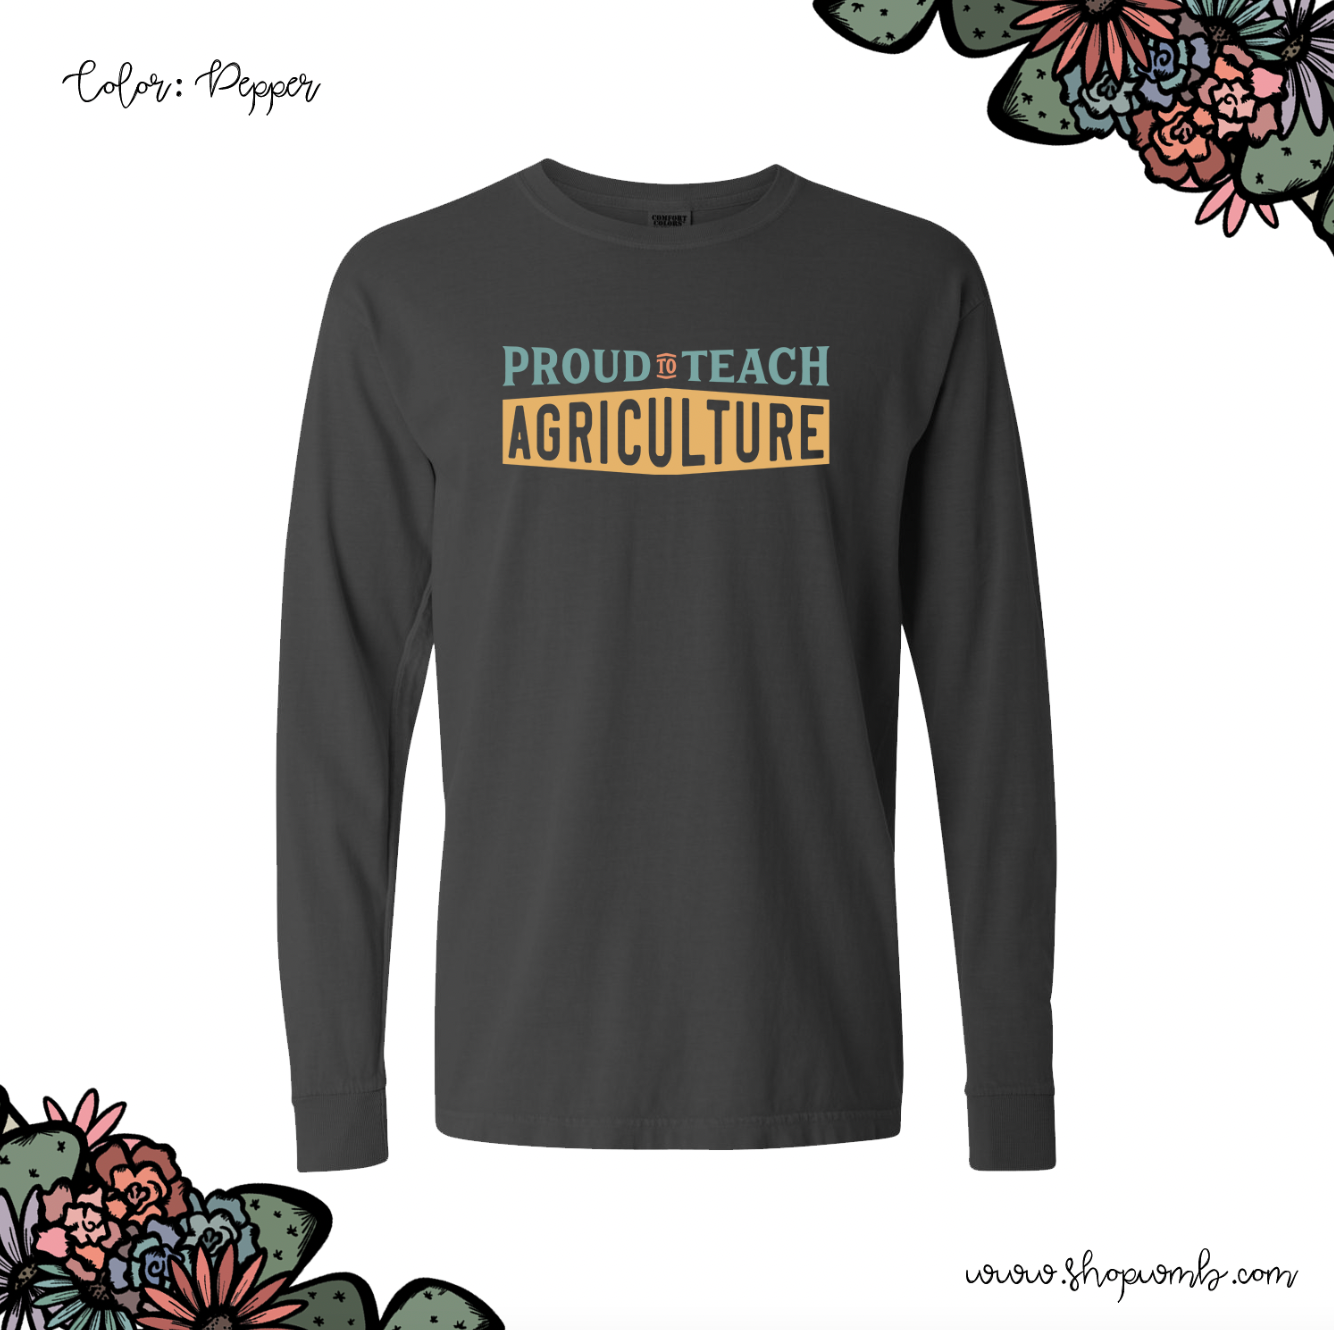 Proud To Teach Agriculture LONG SLEEVE T-Shirt (S-3XL) - Multiple Colors!